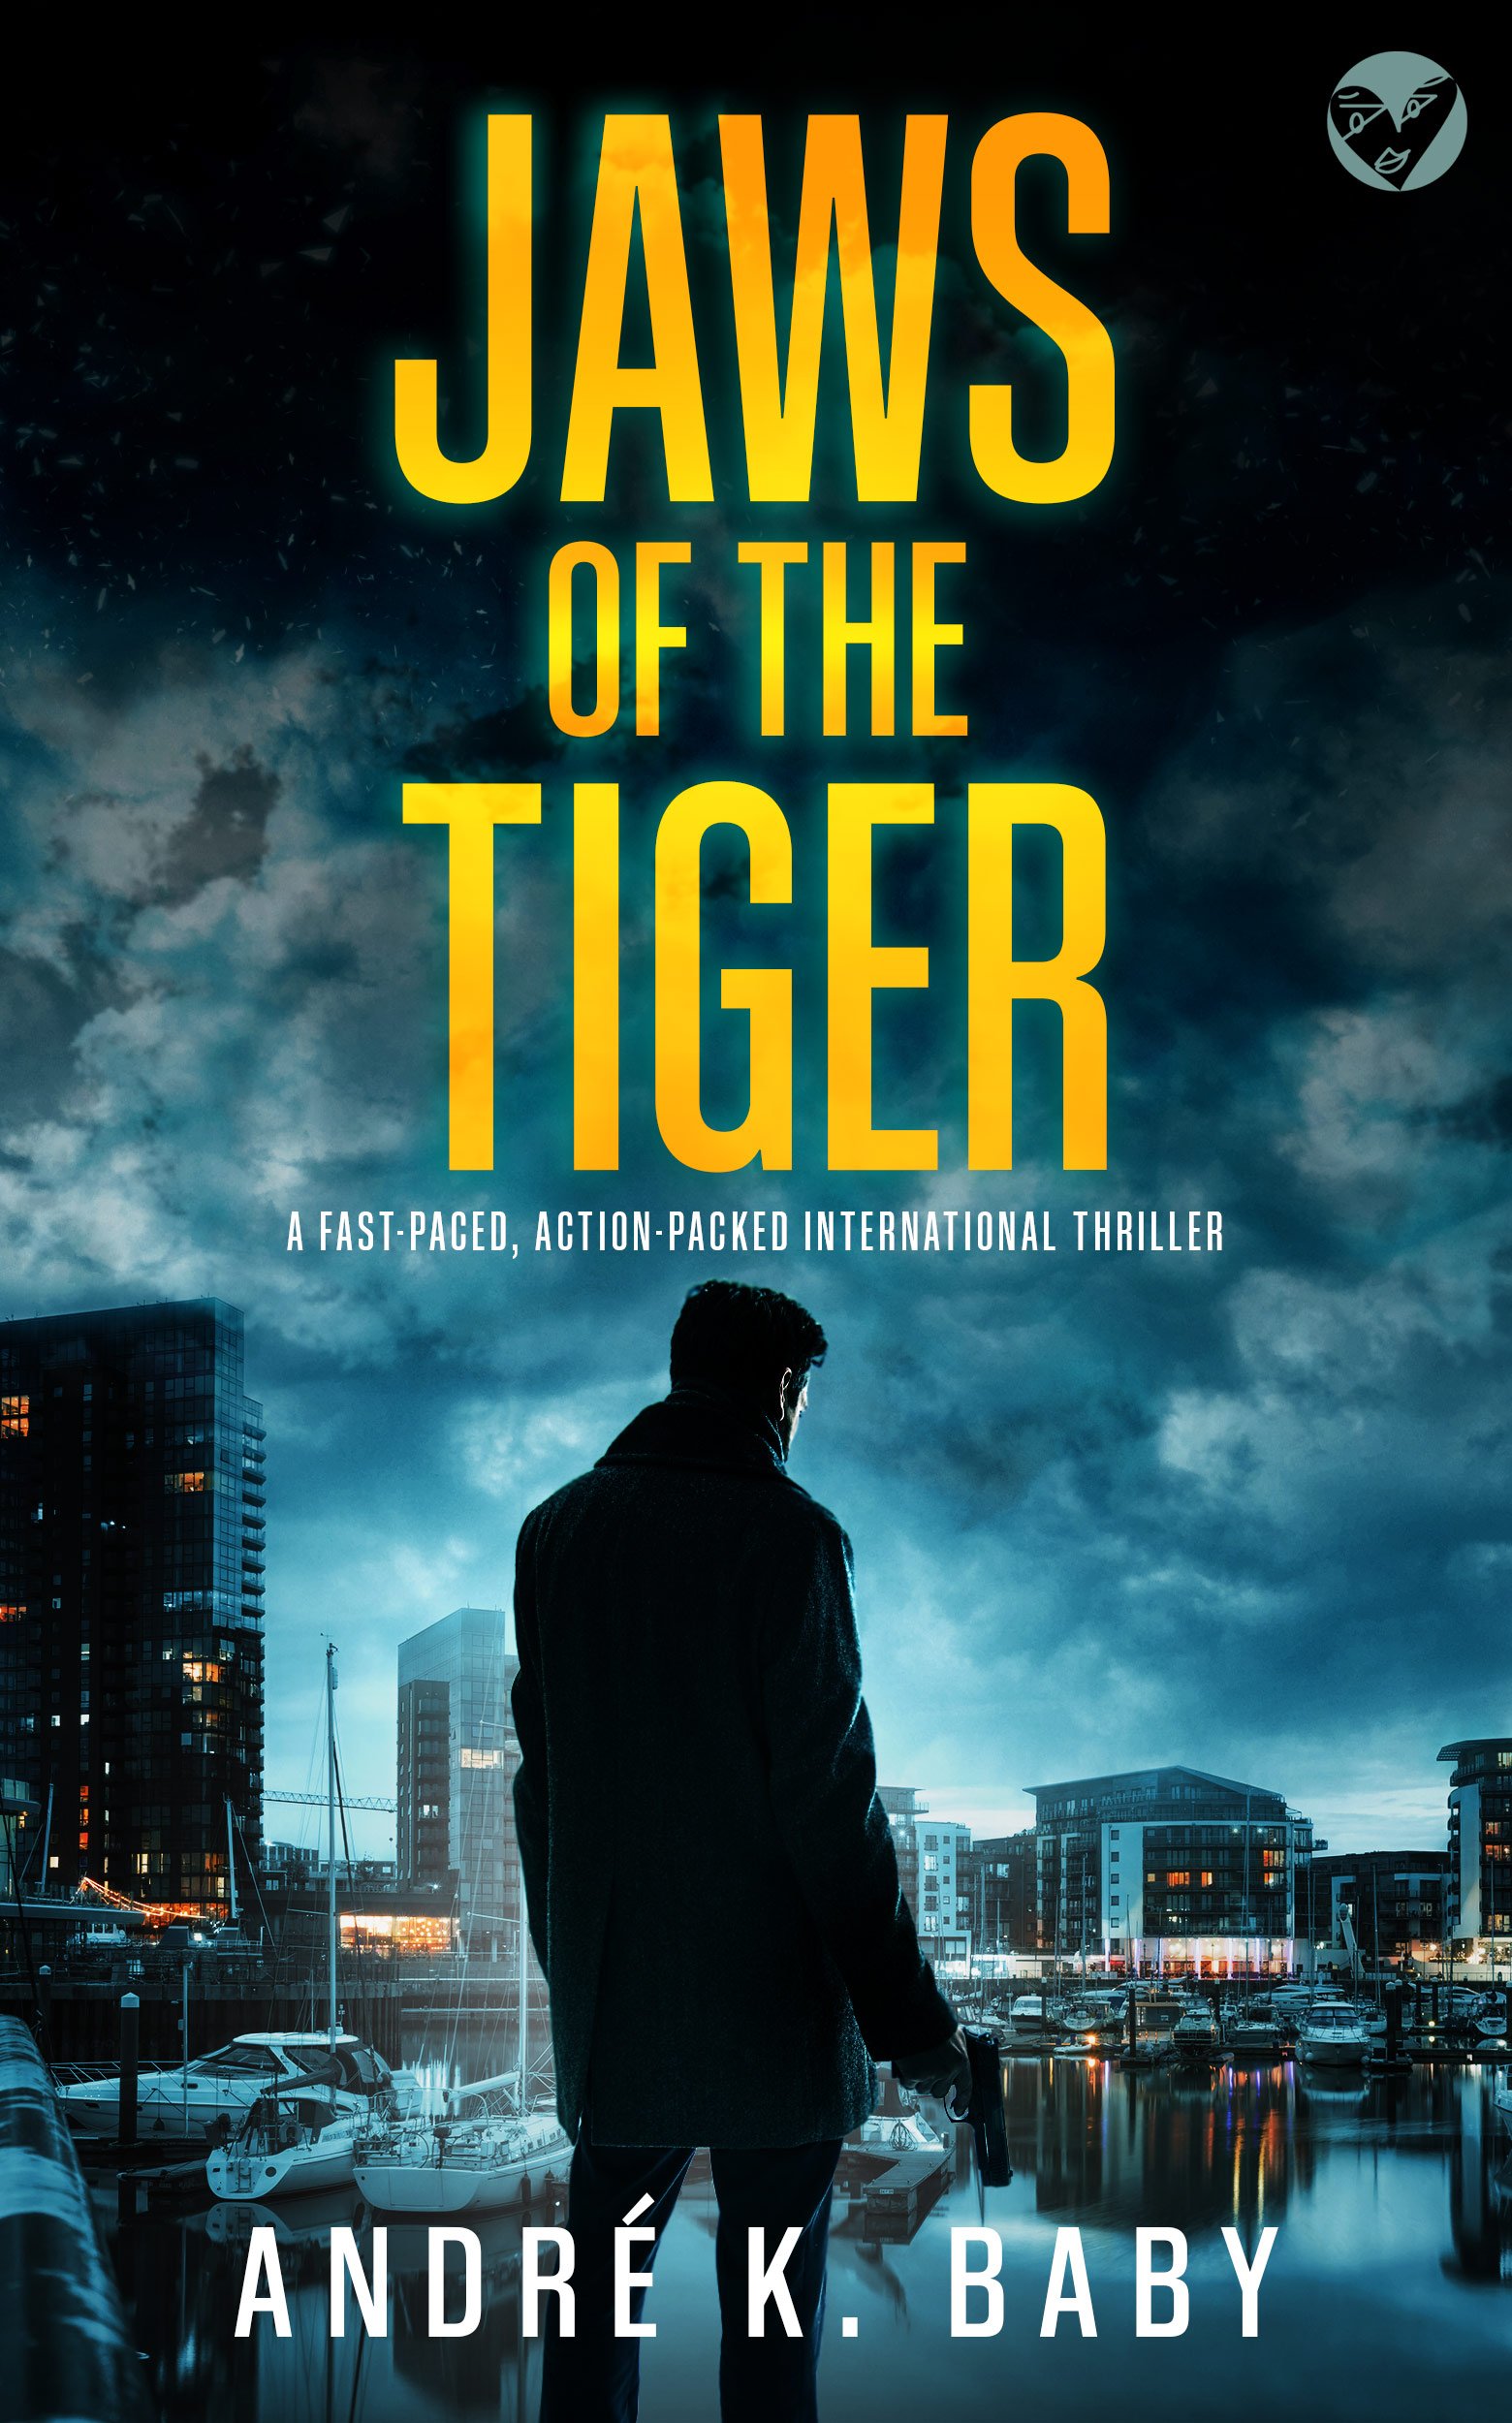 JAWS OF THE TIGER Cover publish 628KB.jpg